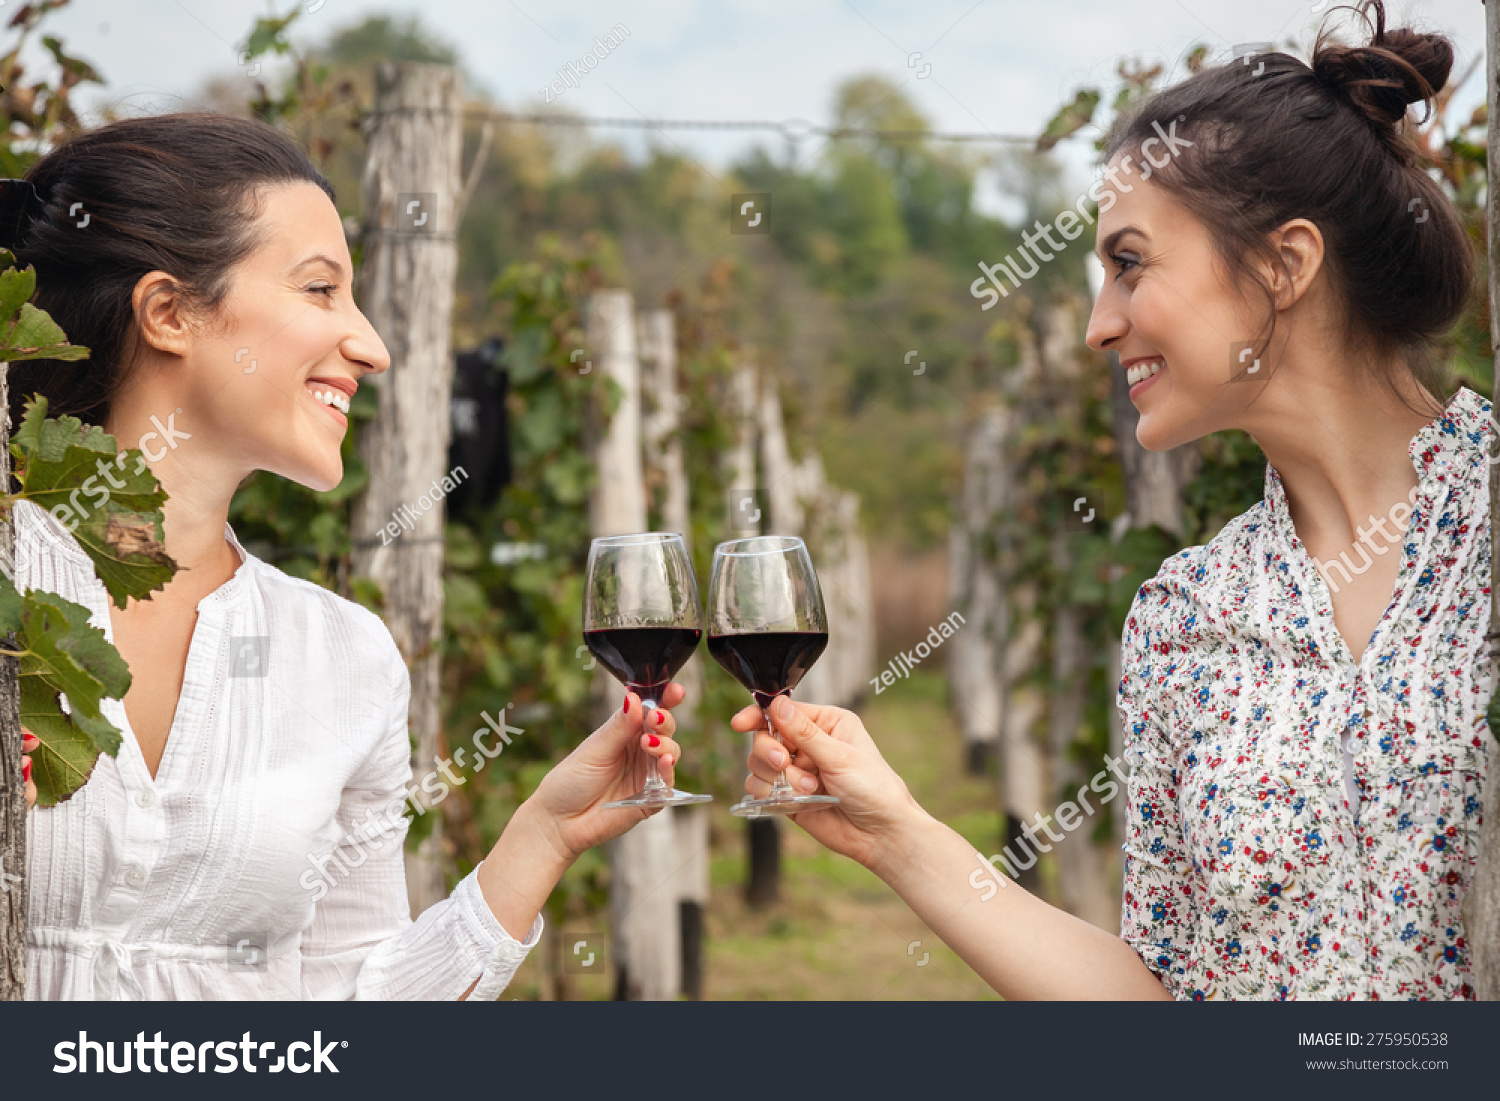 Two Beautiful Young Women Toasting With Wine In Vineyard #275950538